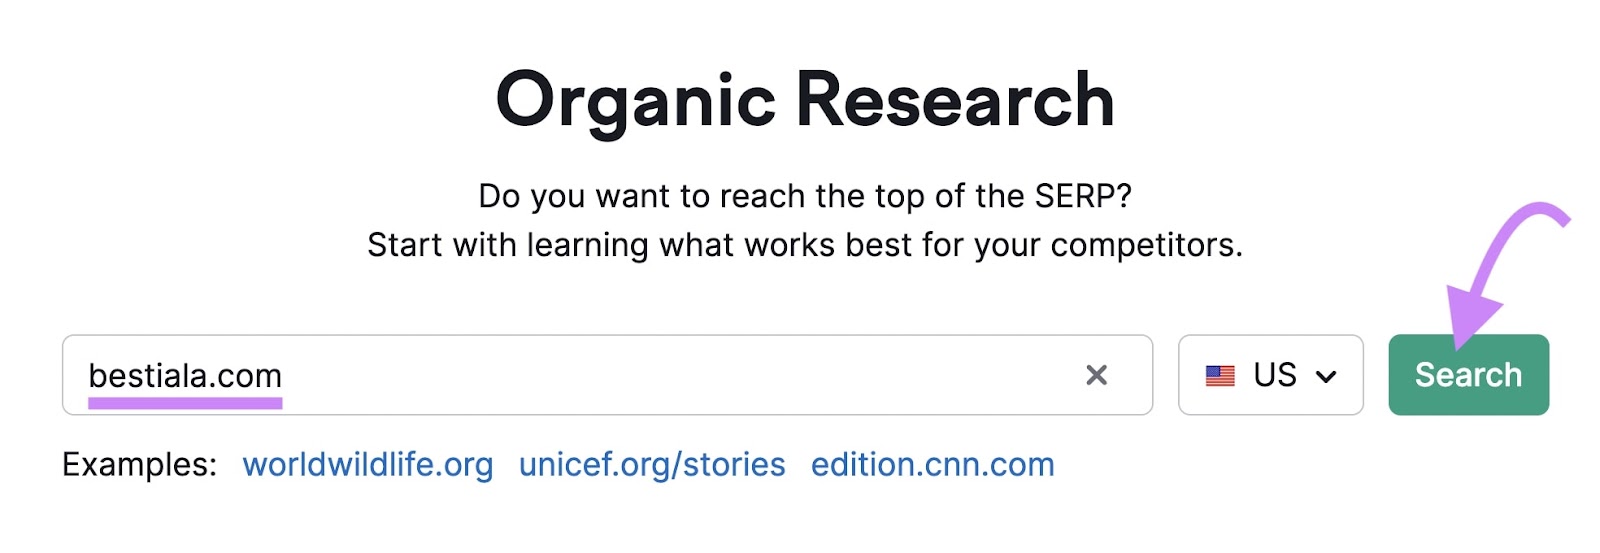 "bestiala.com" domain entered into the Organic Research instrumentality   hunt  bar